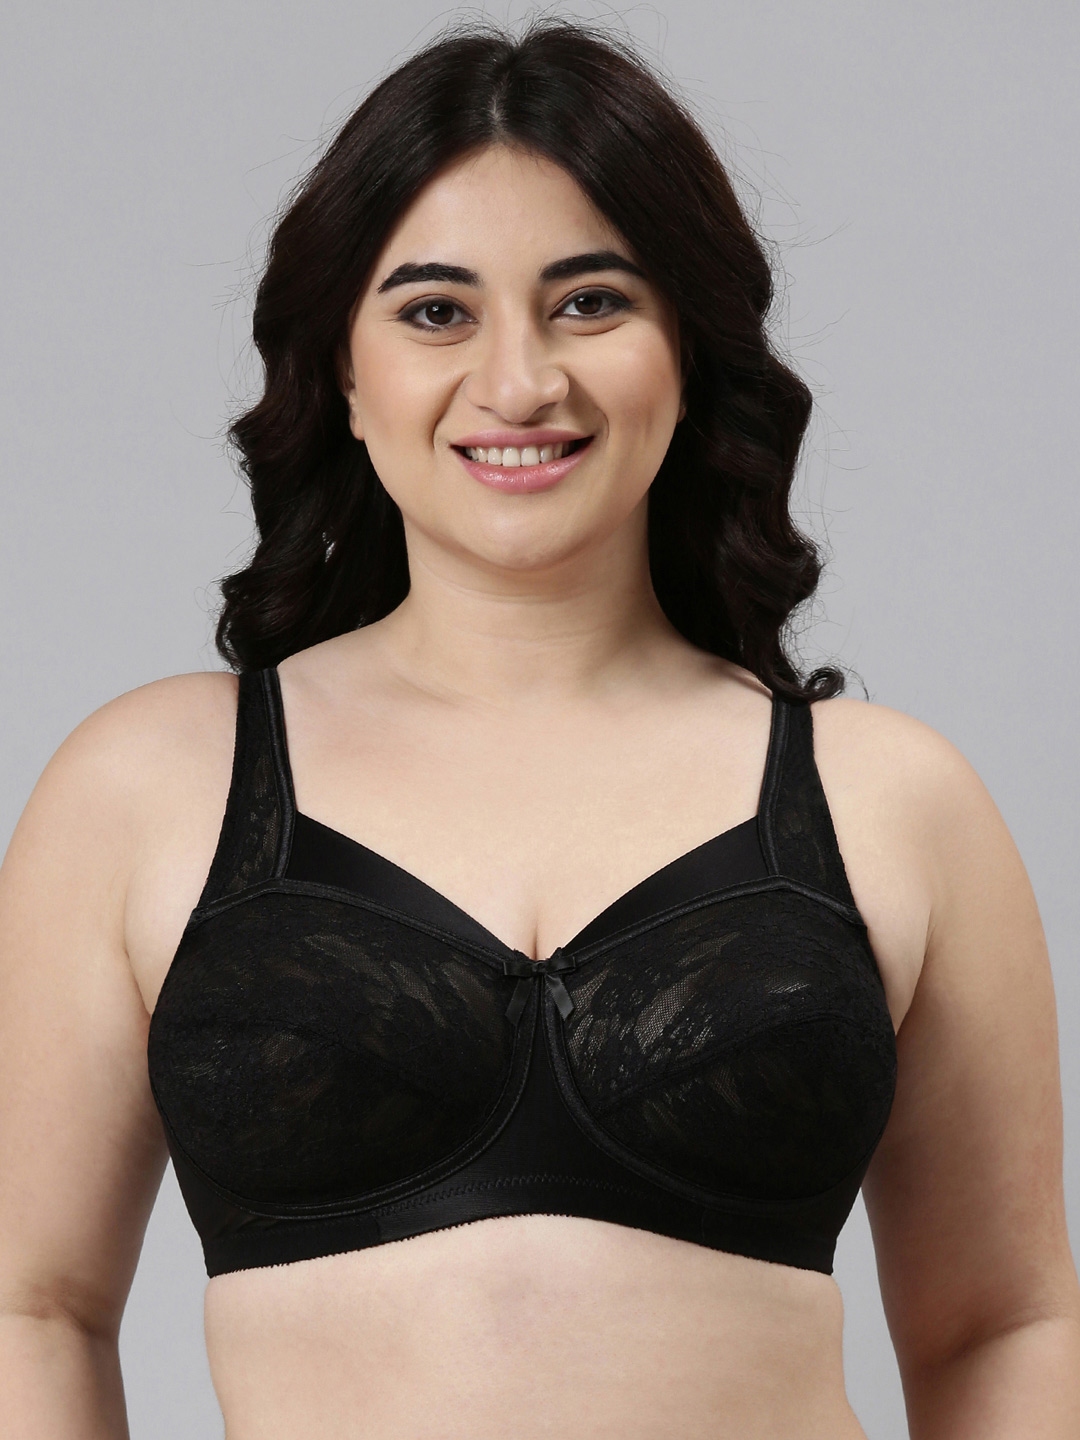 Buy Padded Non-Wired Full Cup Bra in Black - Lace Online India